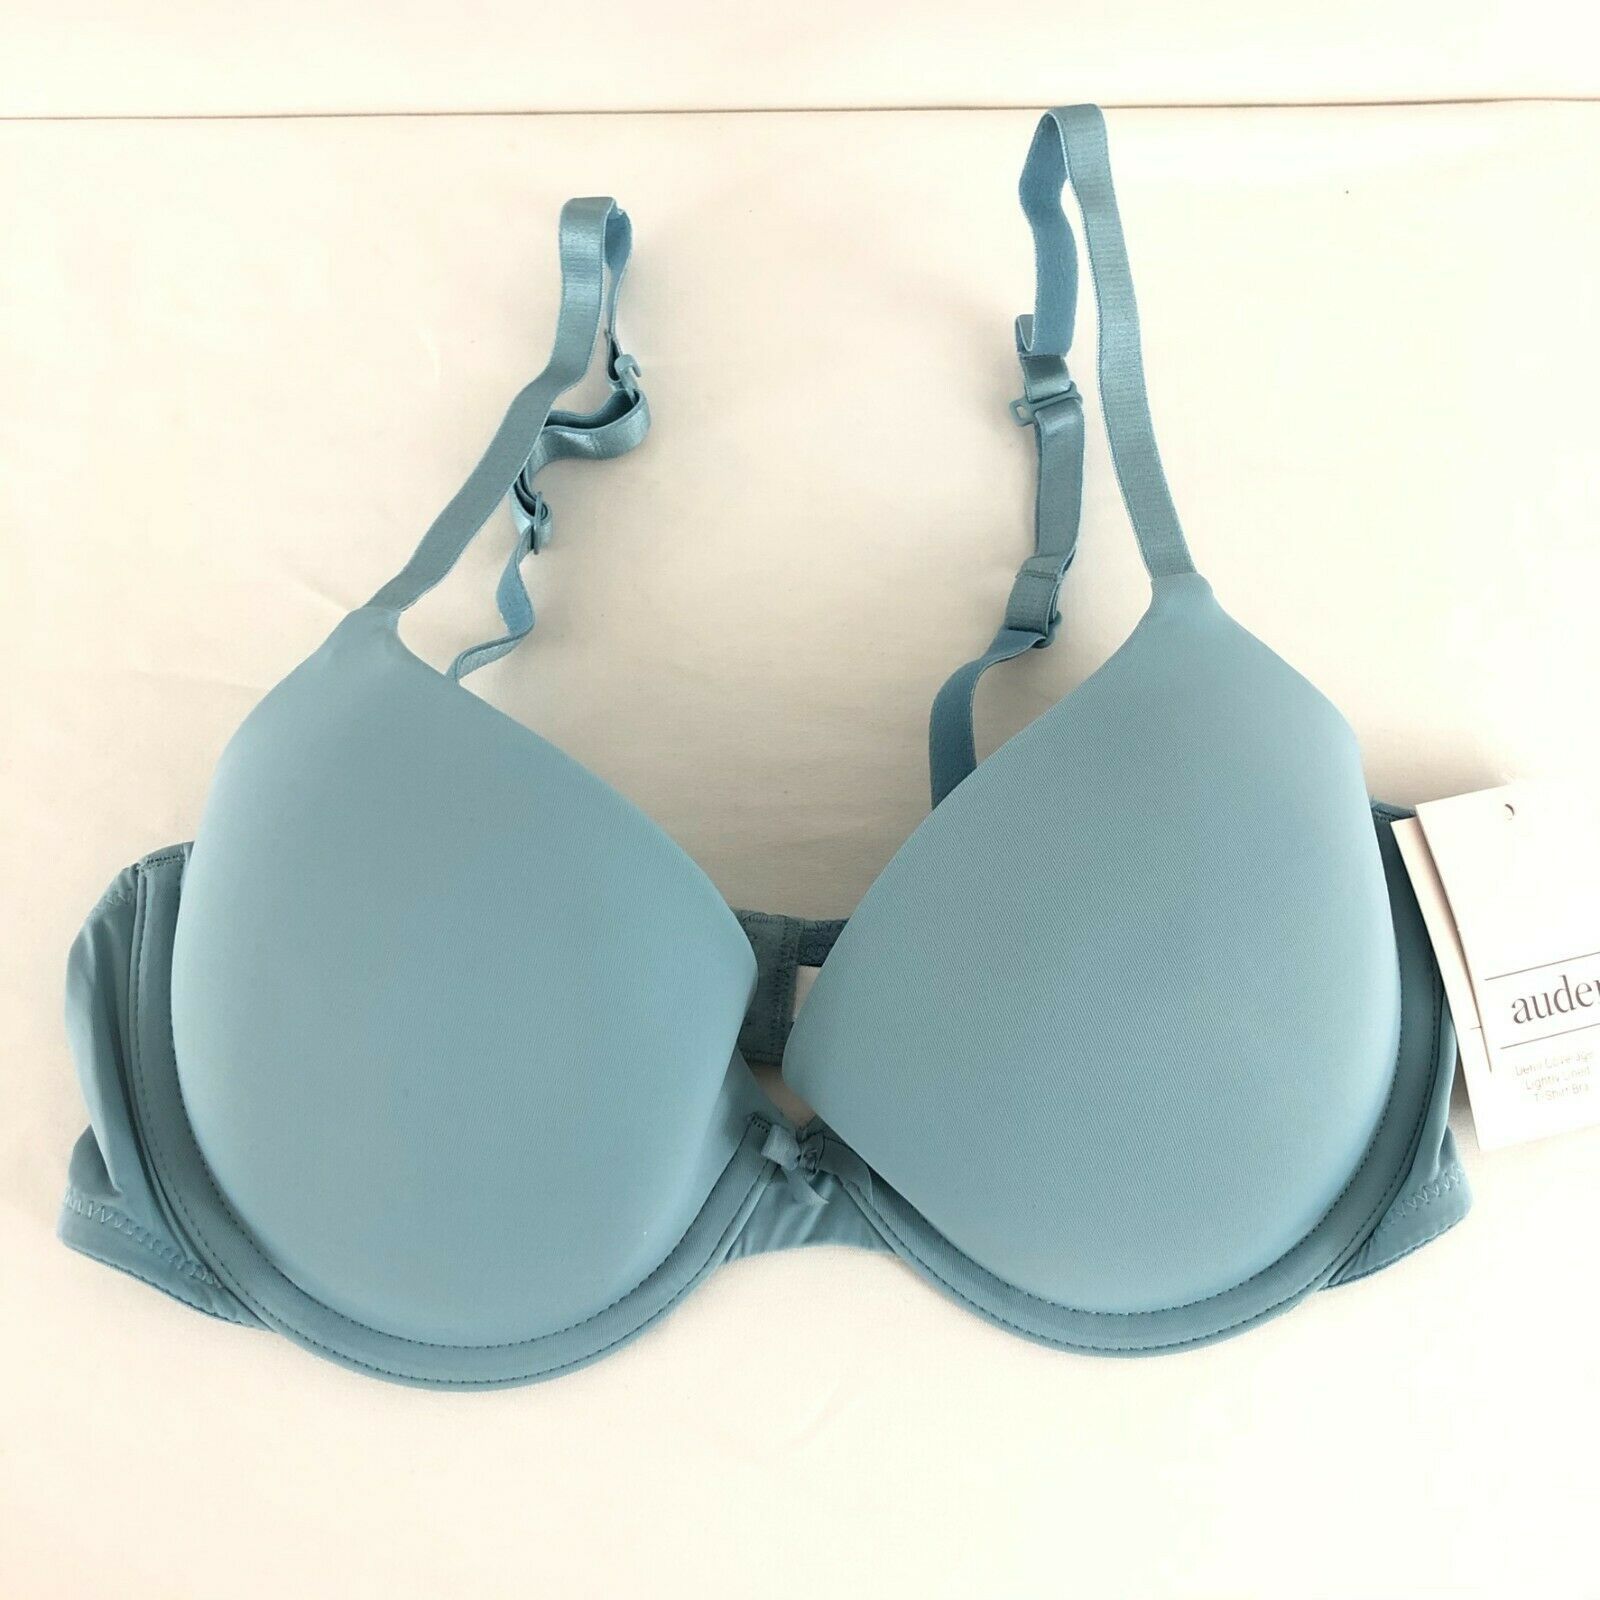 Auden T-Shirt Bra The Everyday Demi Coverage and 50 similar items